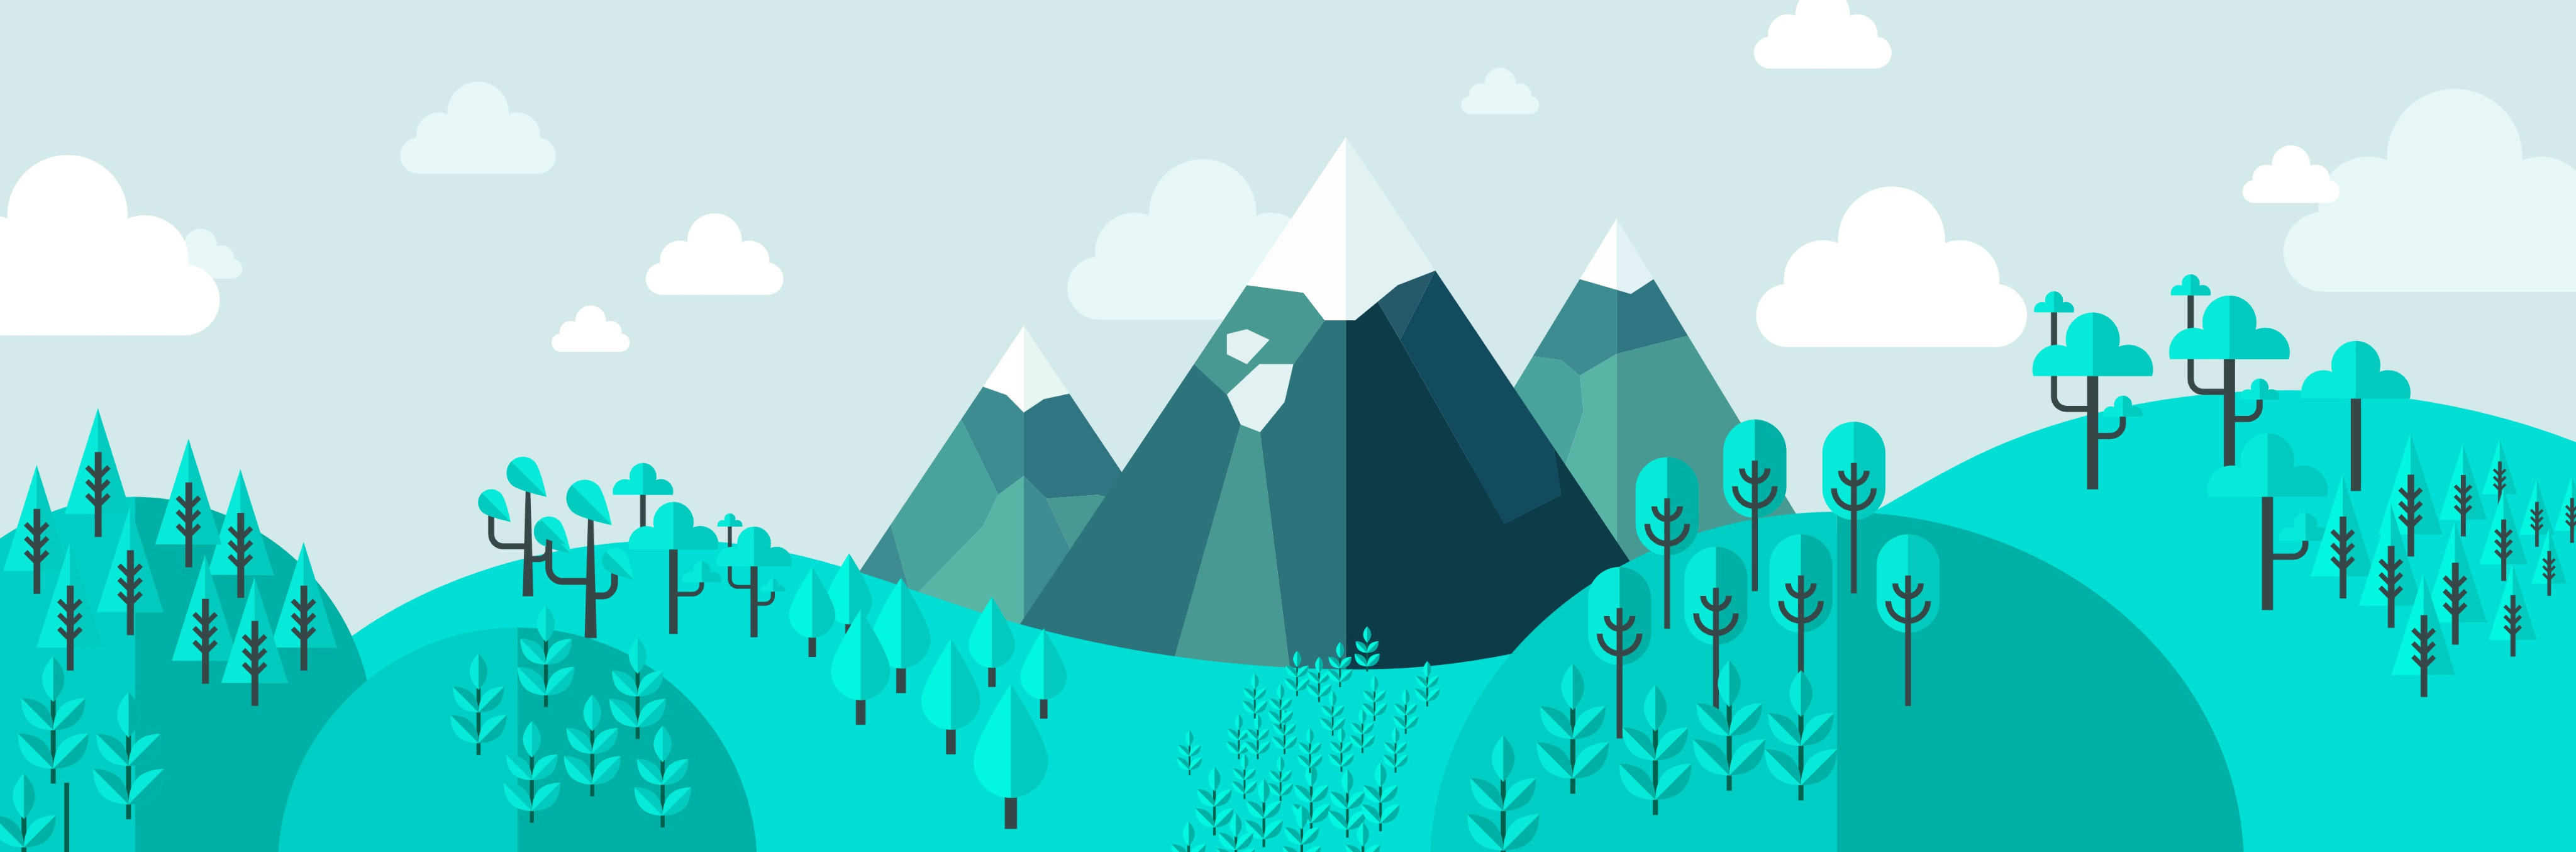 Graphic design of mountain tops and hills